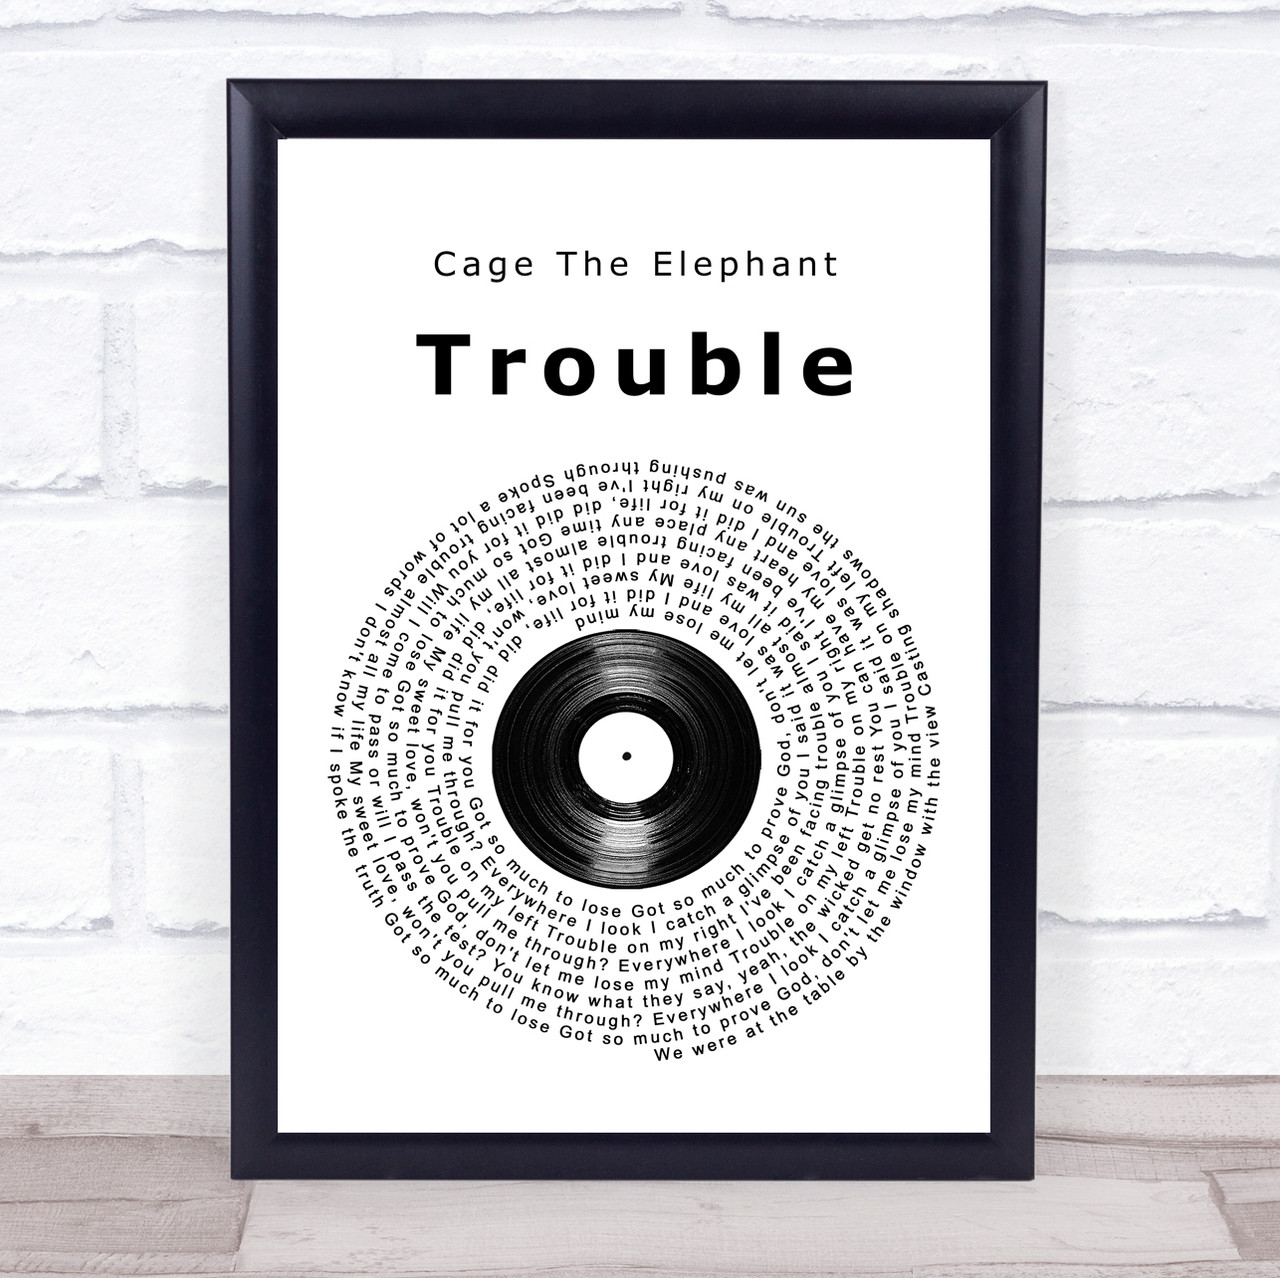 TROUBLE LYRICS by CAGE THE ELEPHANT: We were at the